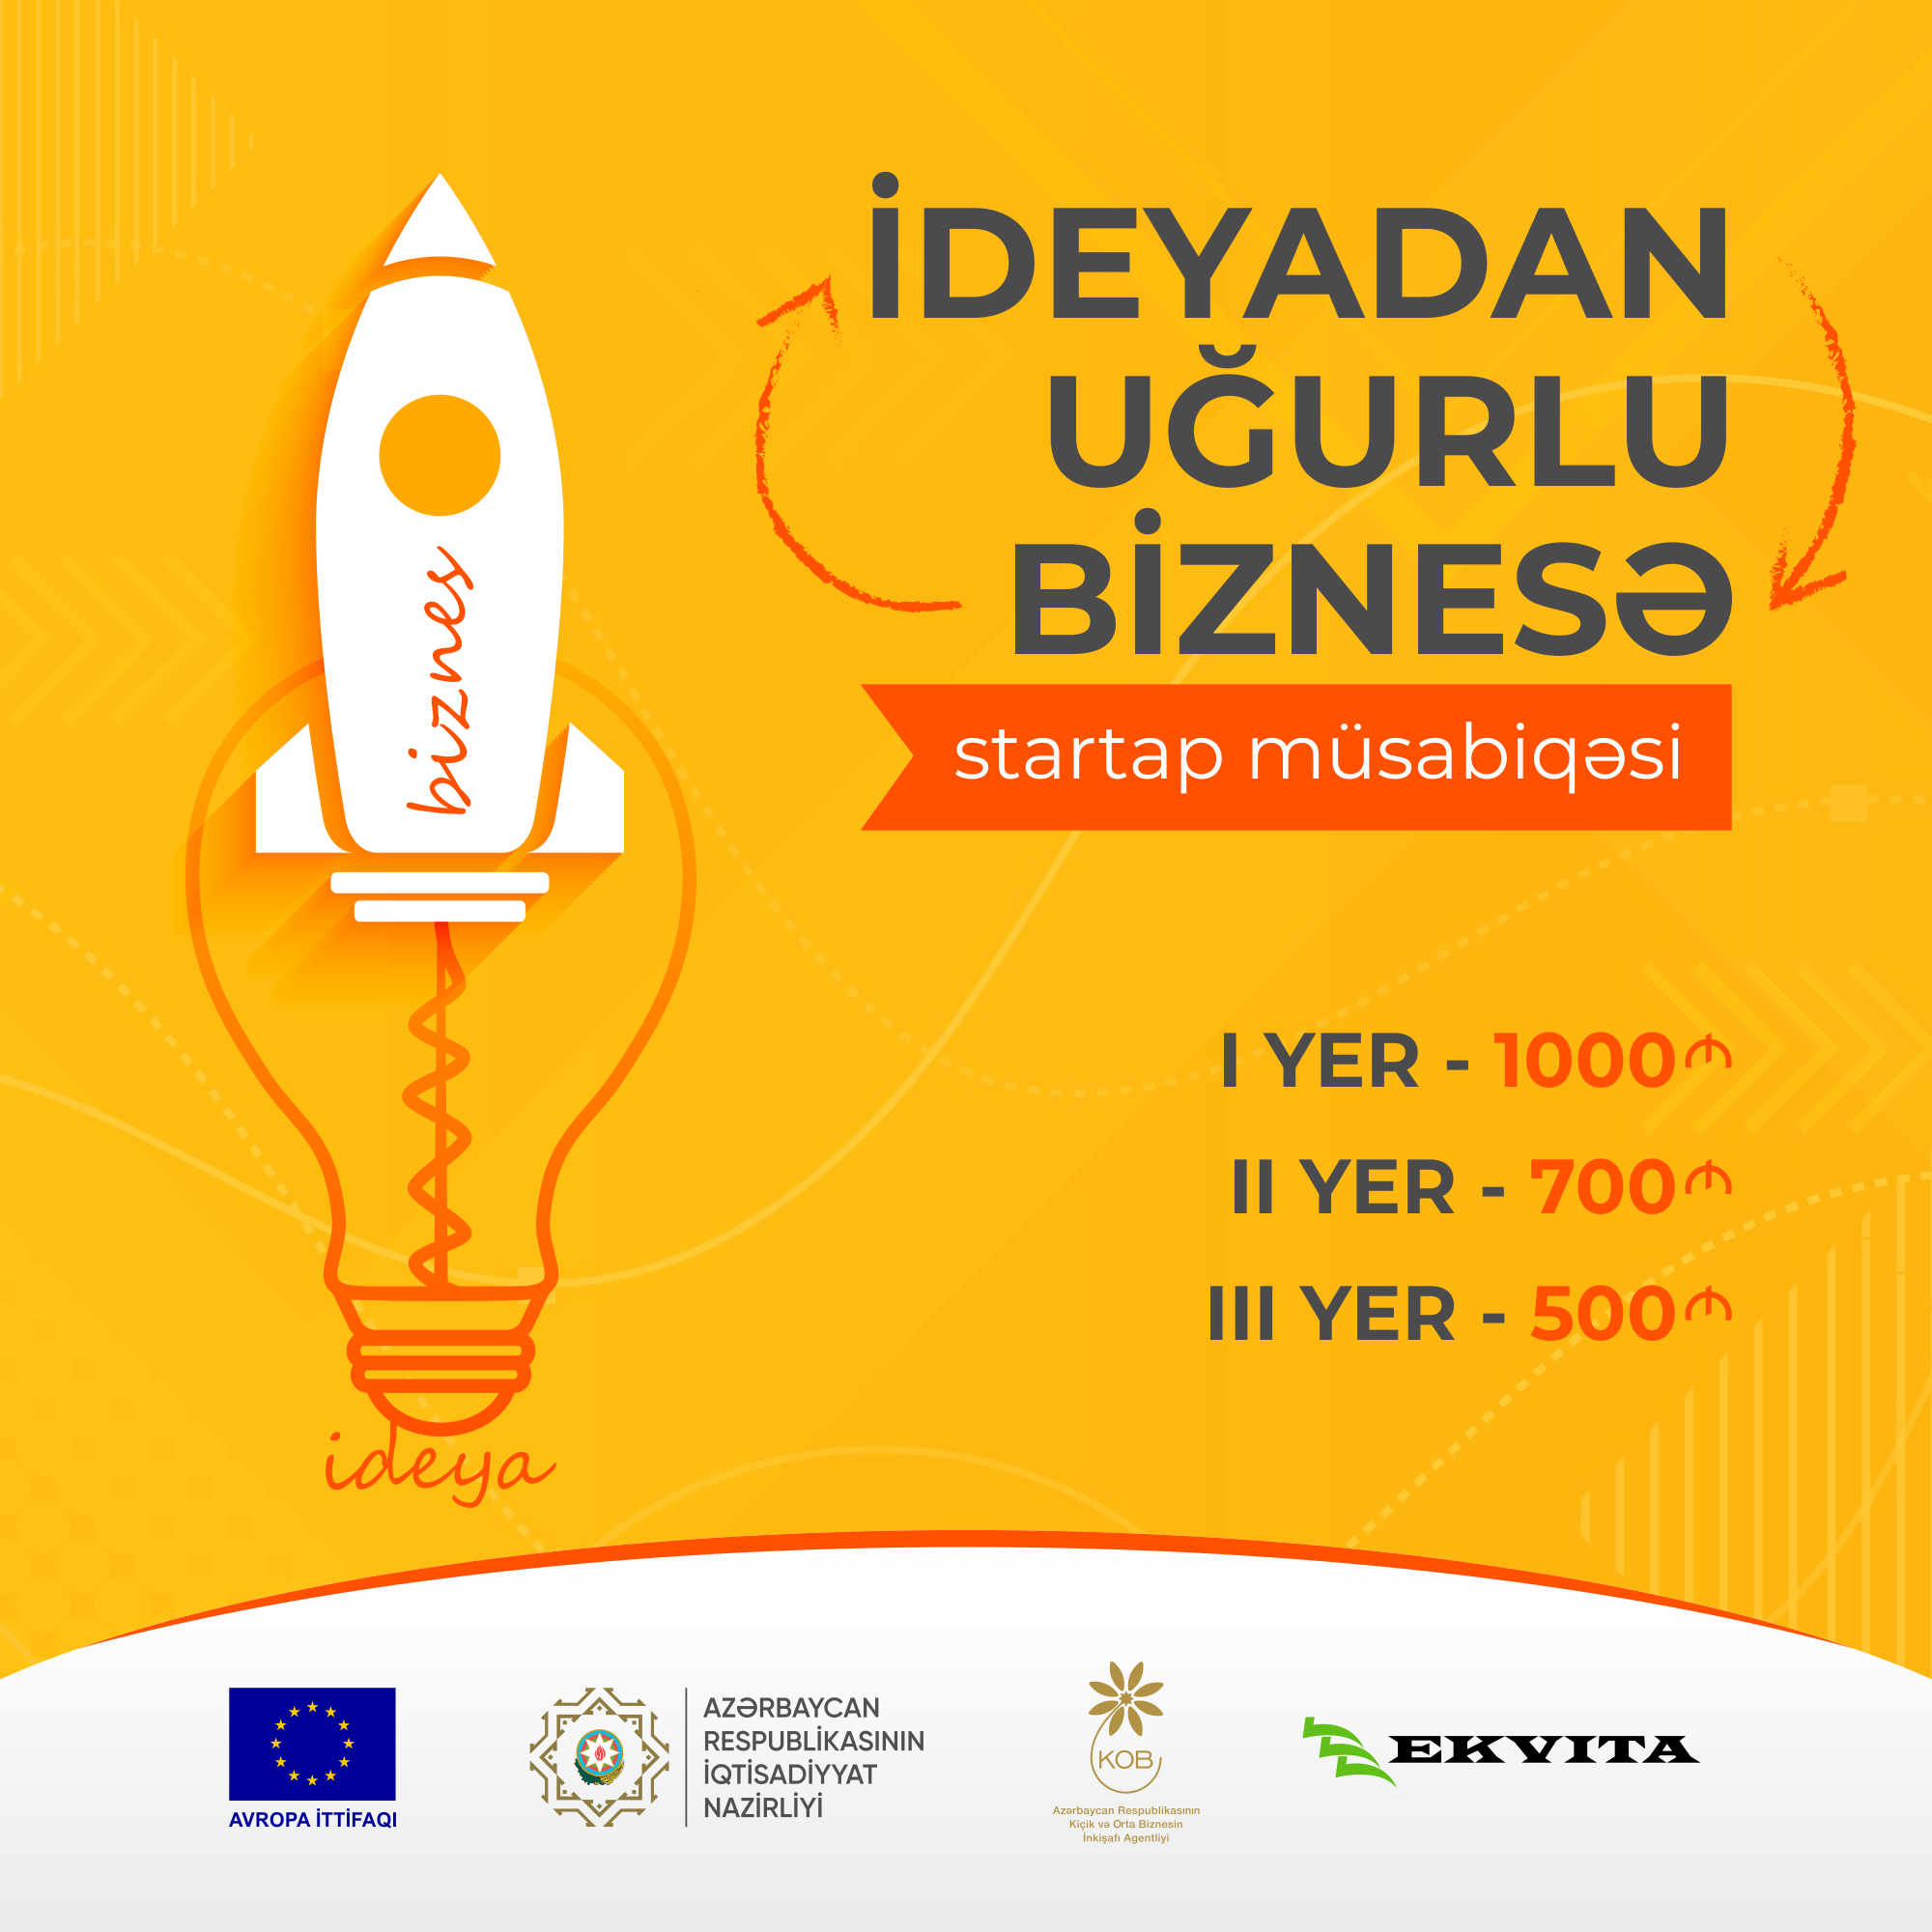 The startup competition “From idea to successful business” has started 